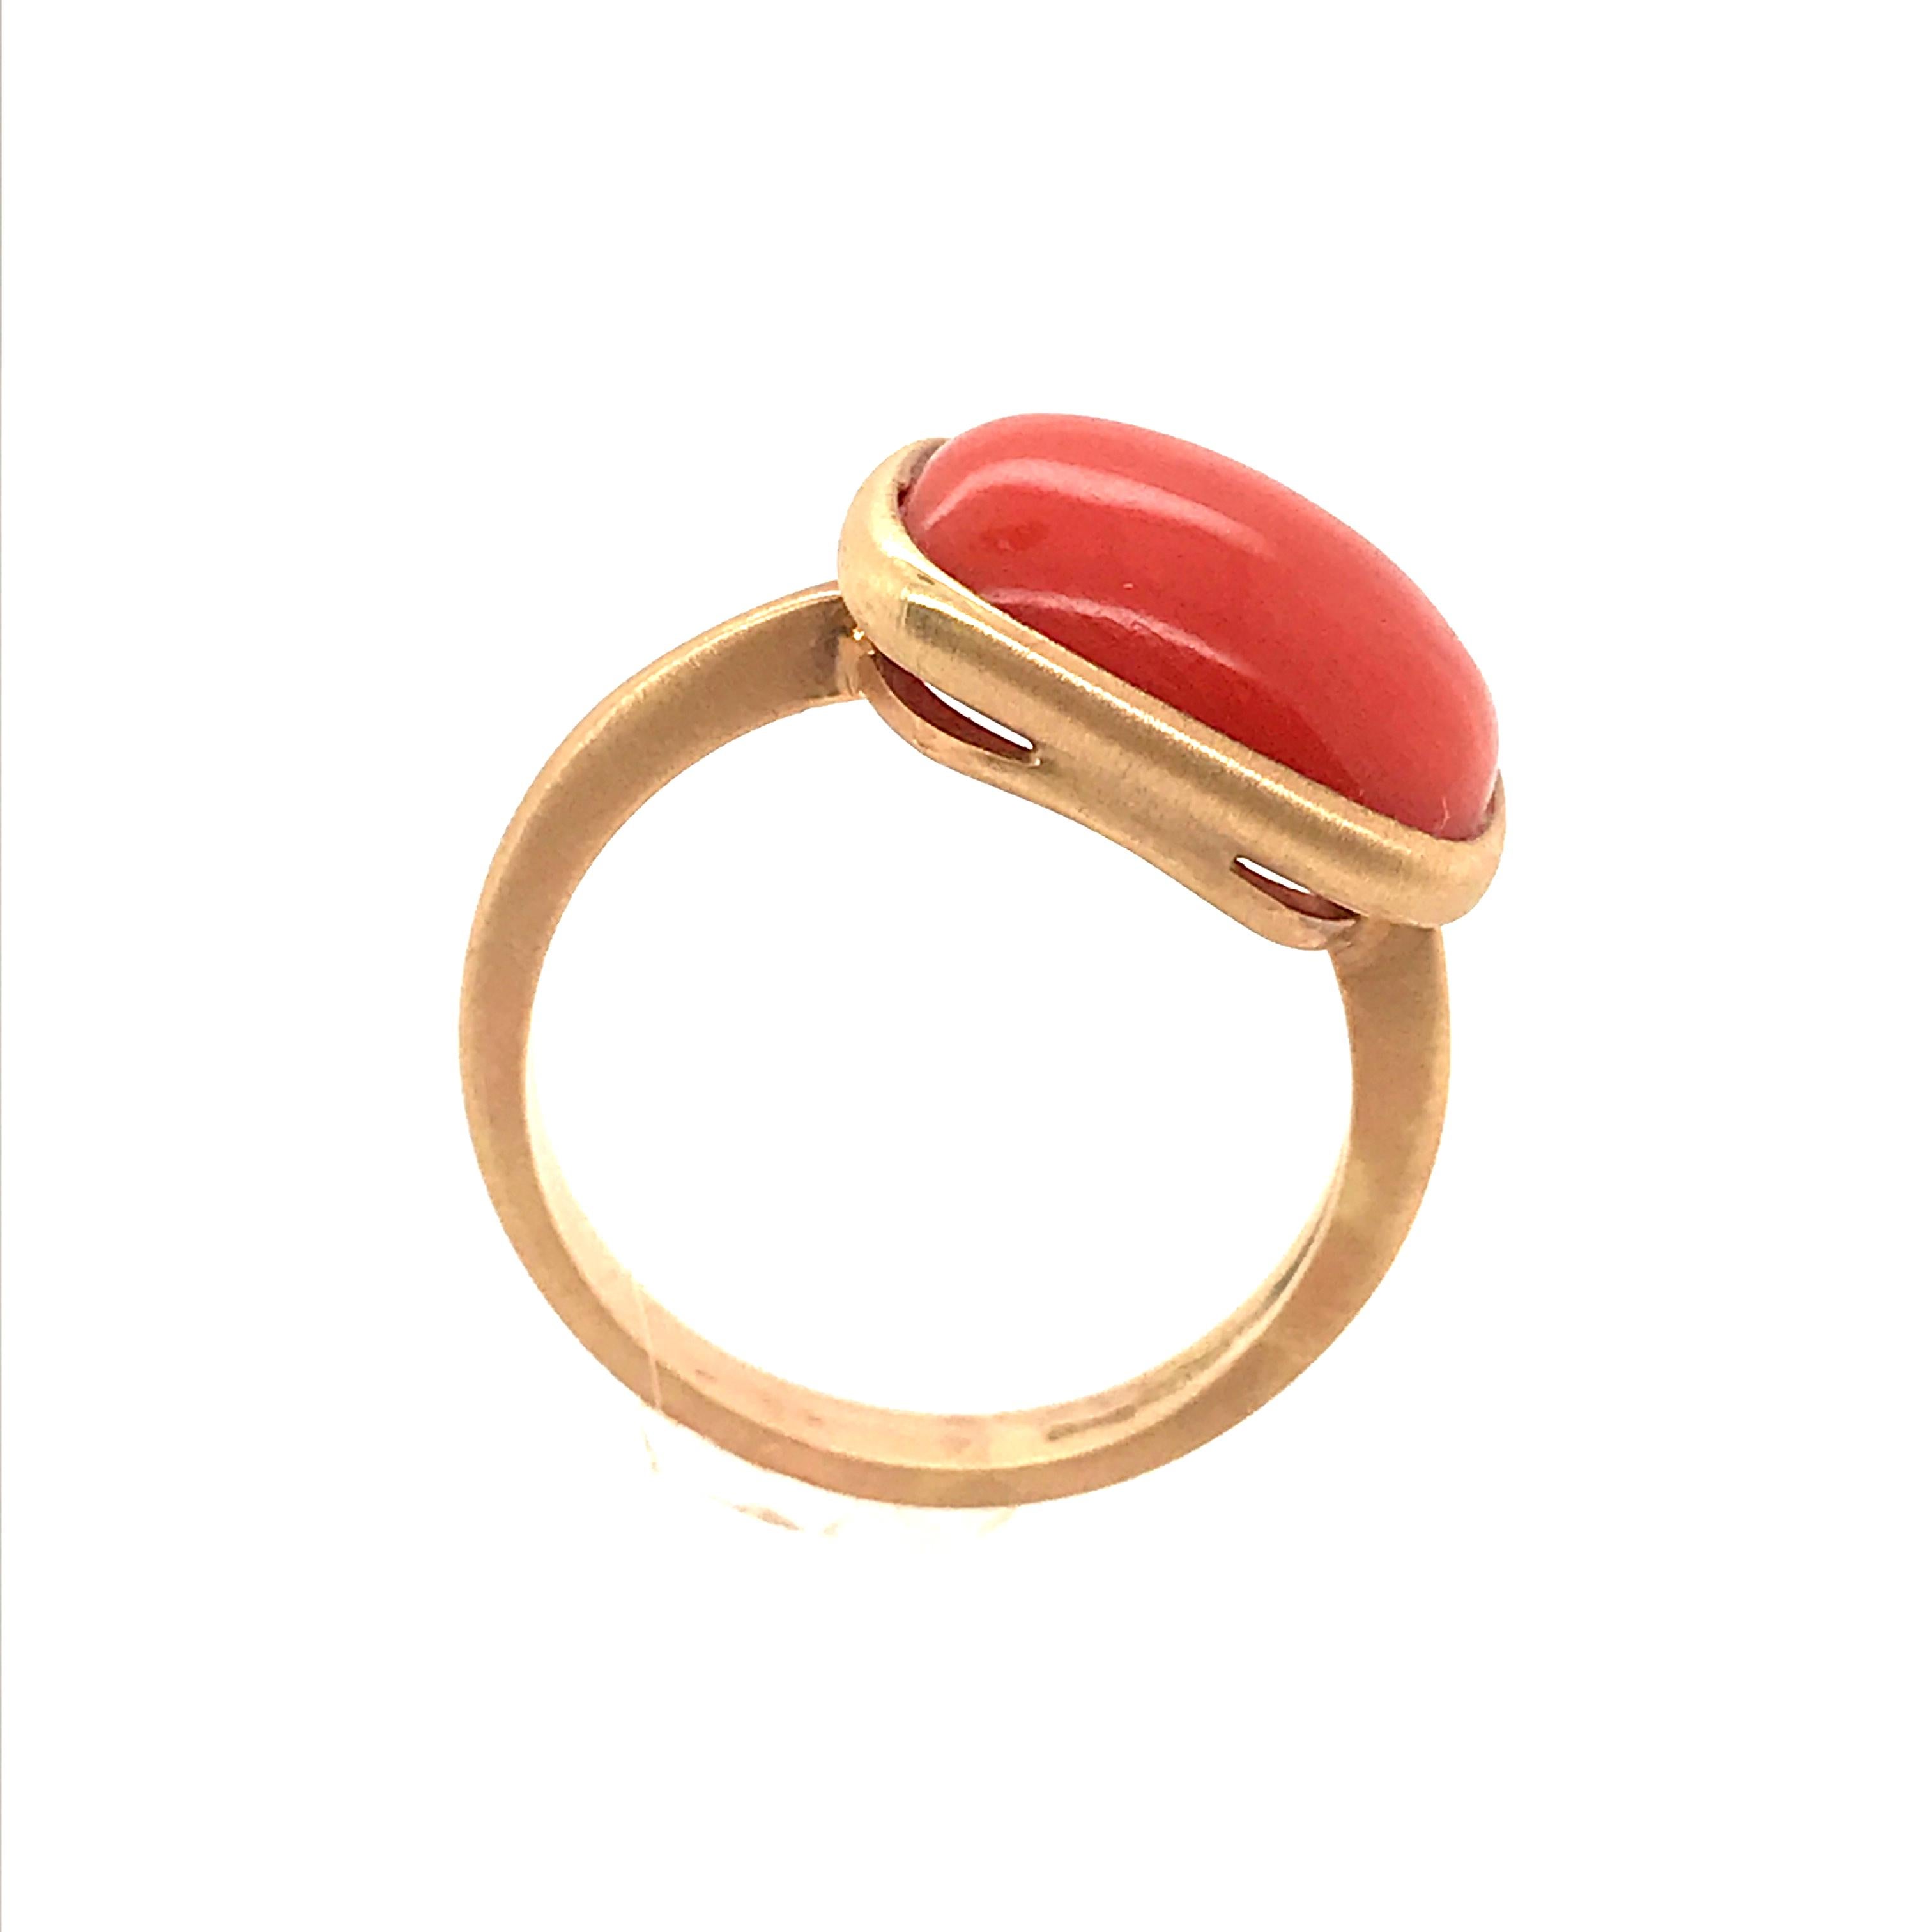 Yellow Gold ring Coral Cabochon
Natural Coral size height 1 .5 cm width 1 cm
ring very easy to put on and live all day without thinking about it .
i particularly like this model of rings ,easy and modern.
Yellow Gold 18 K weigh 3.60 g
Size of ring